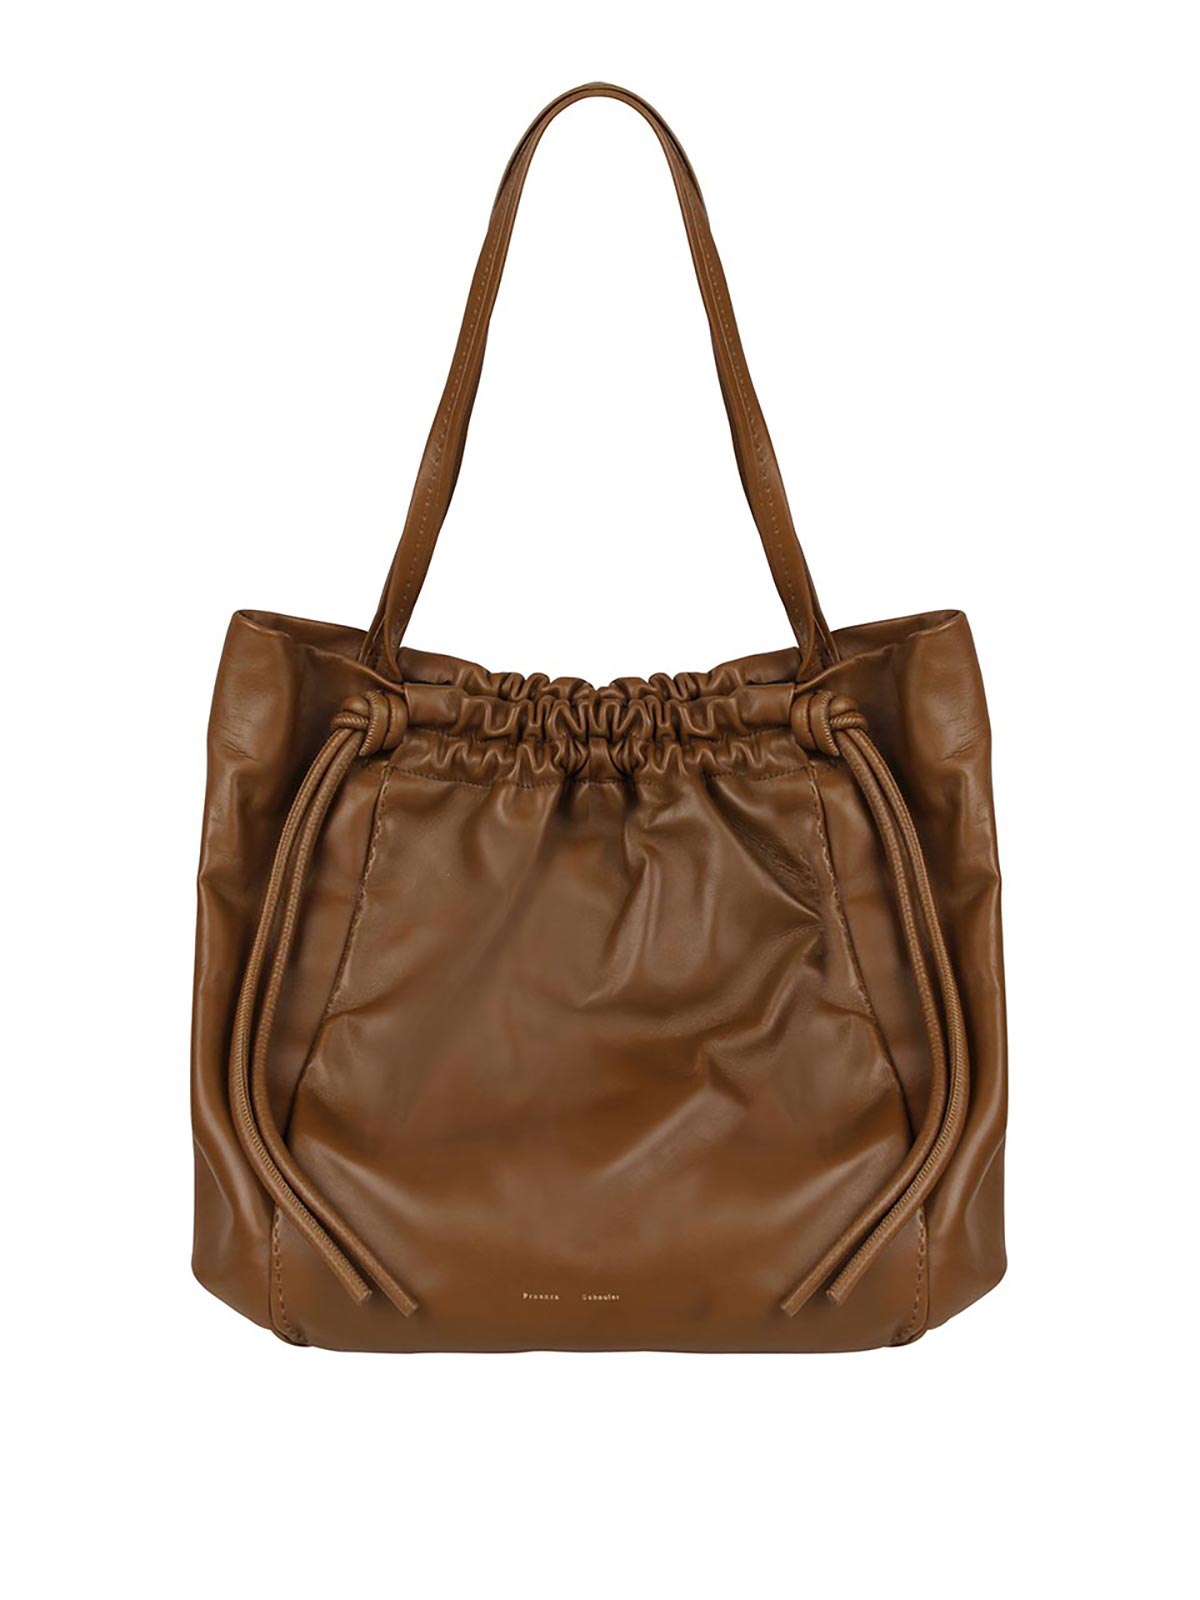 Proenza Schouler Tote Bag With Drawstring In Brown